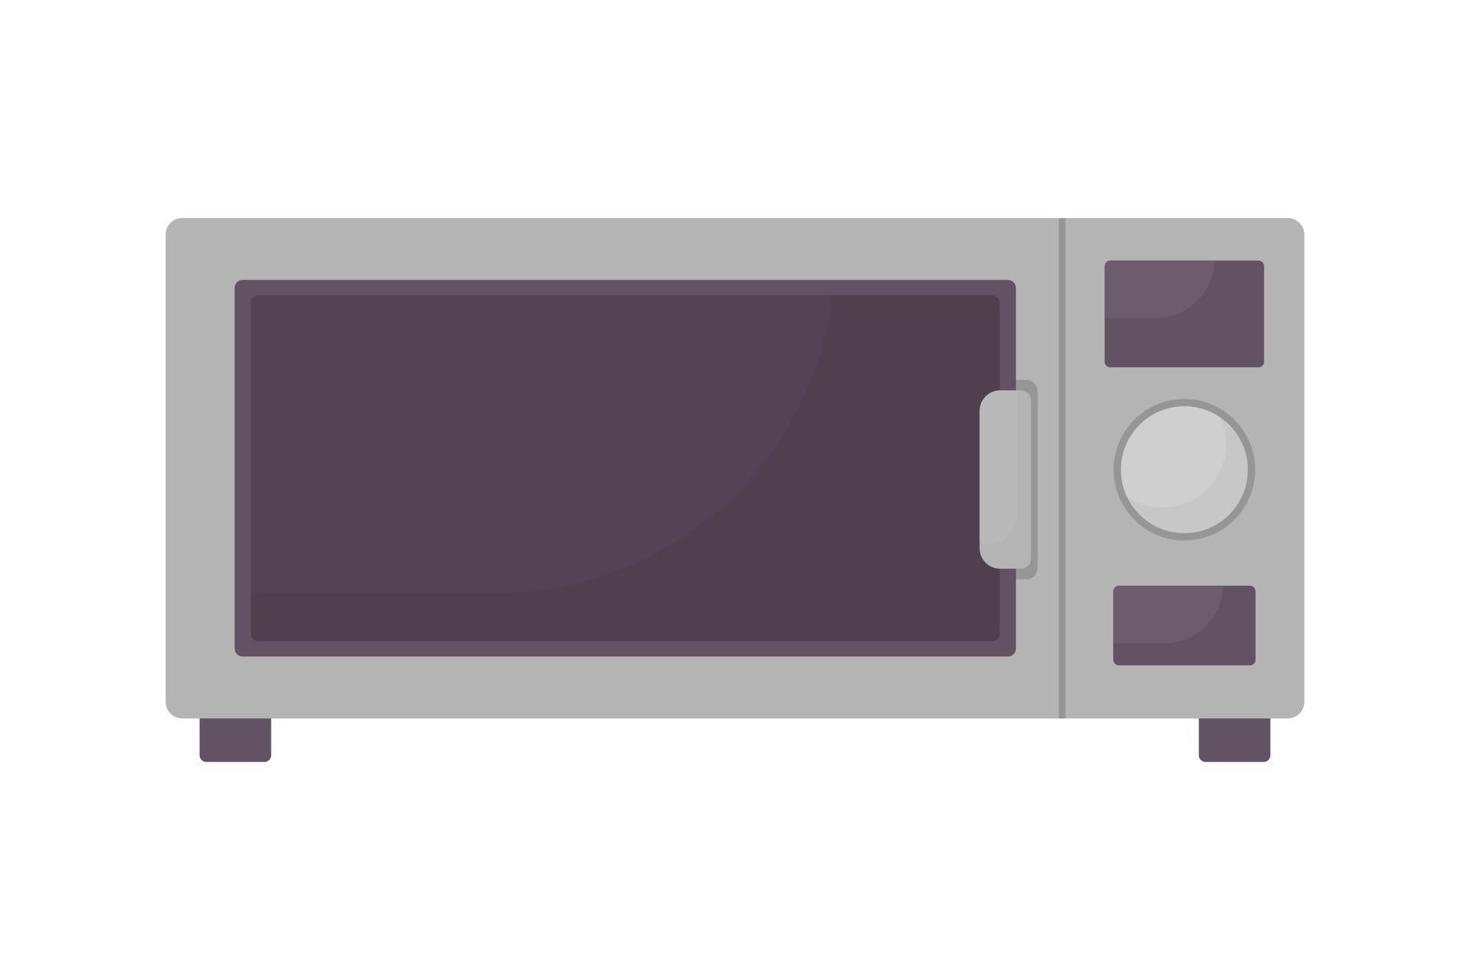 Microwave semi flat color vector object